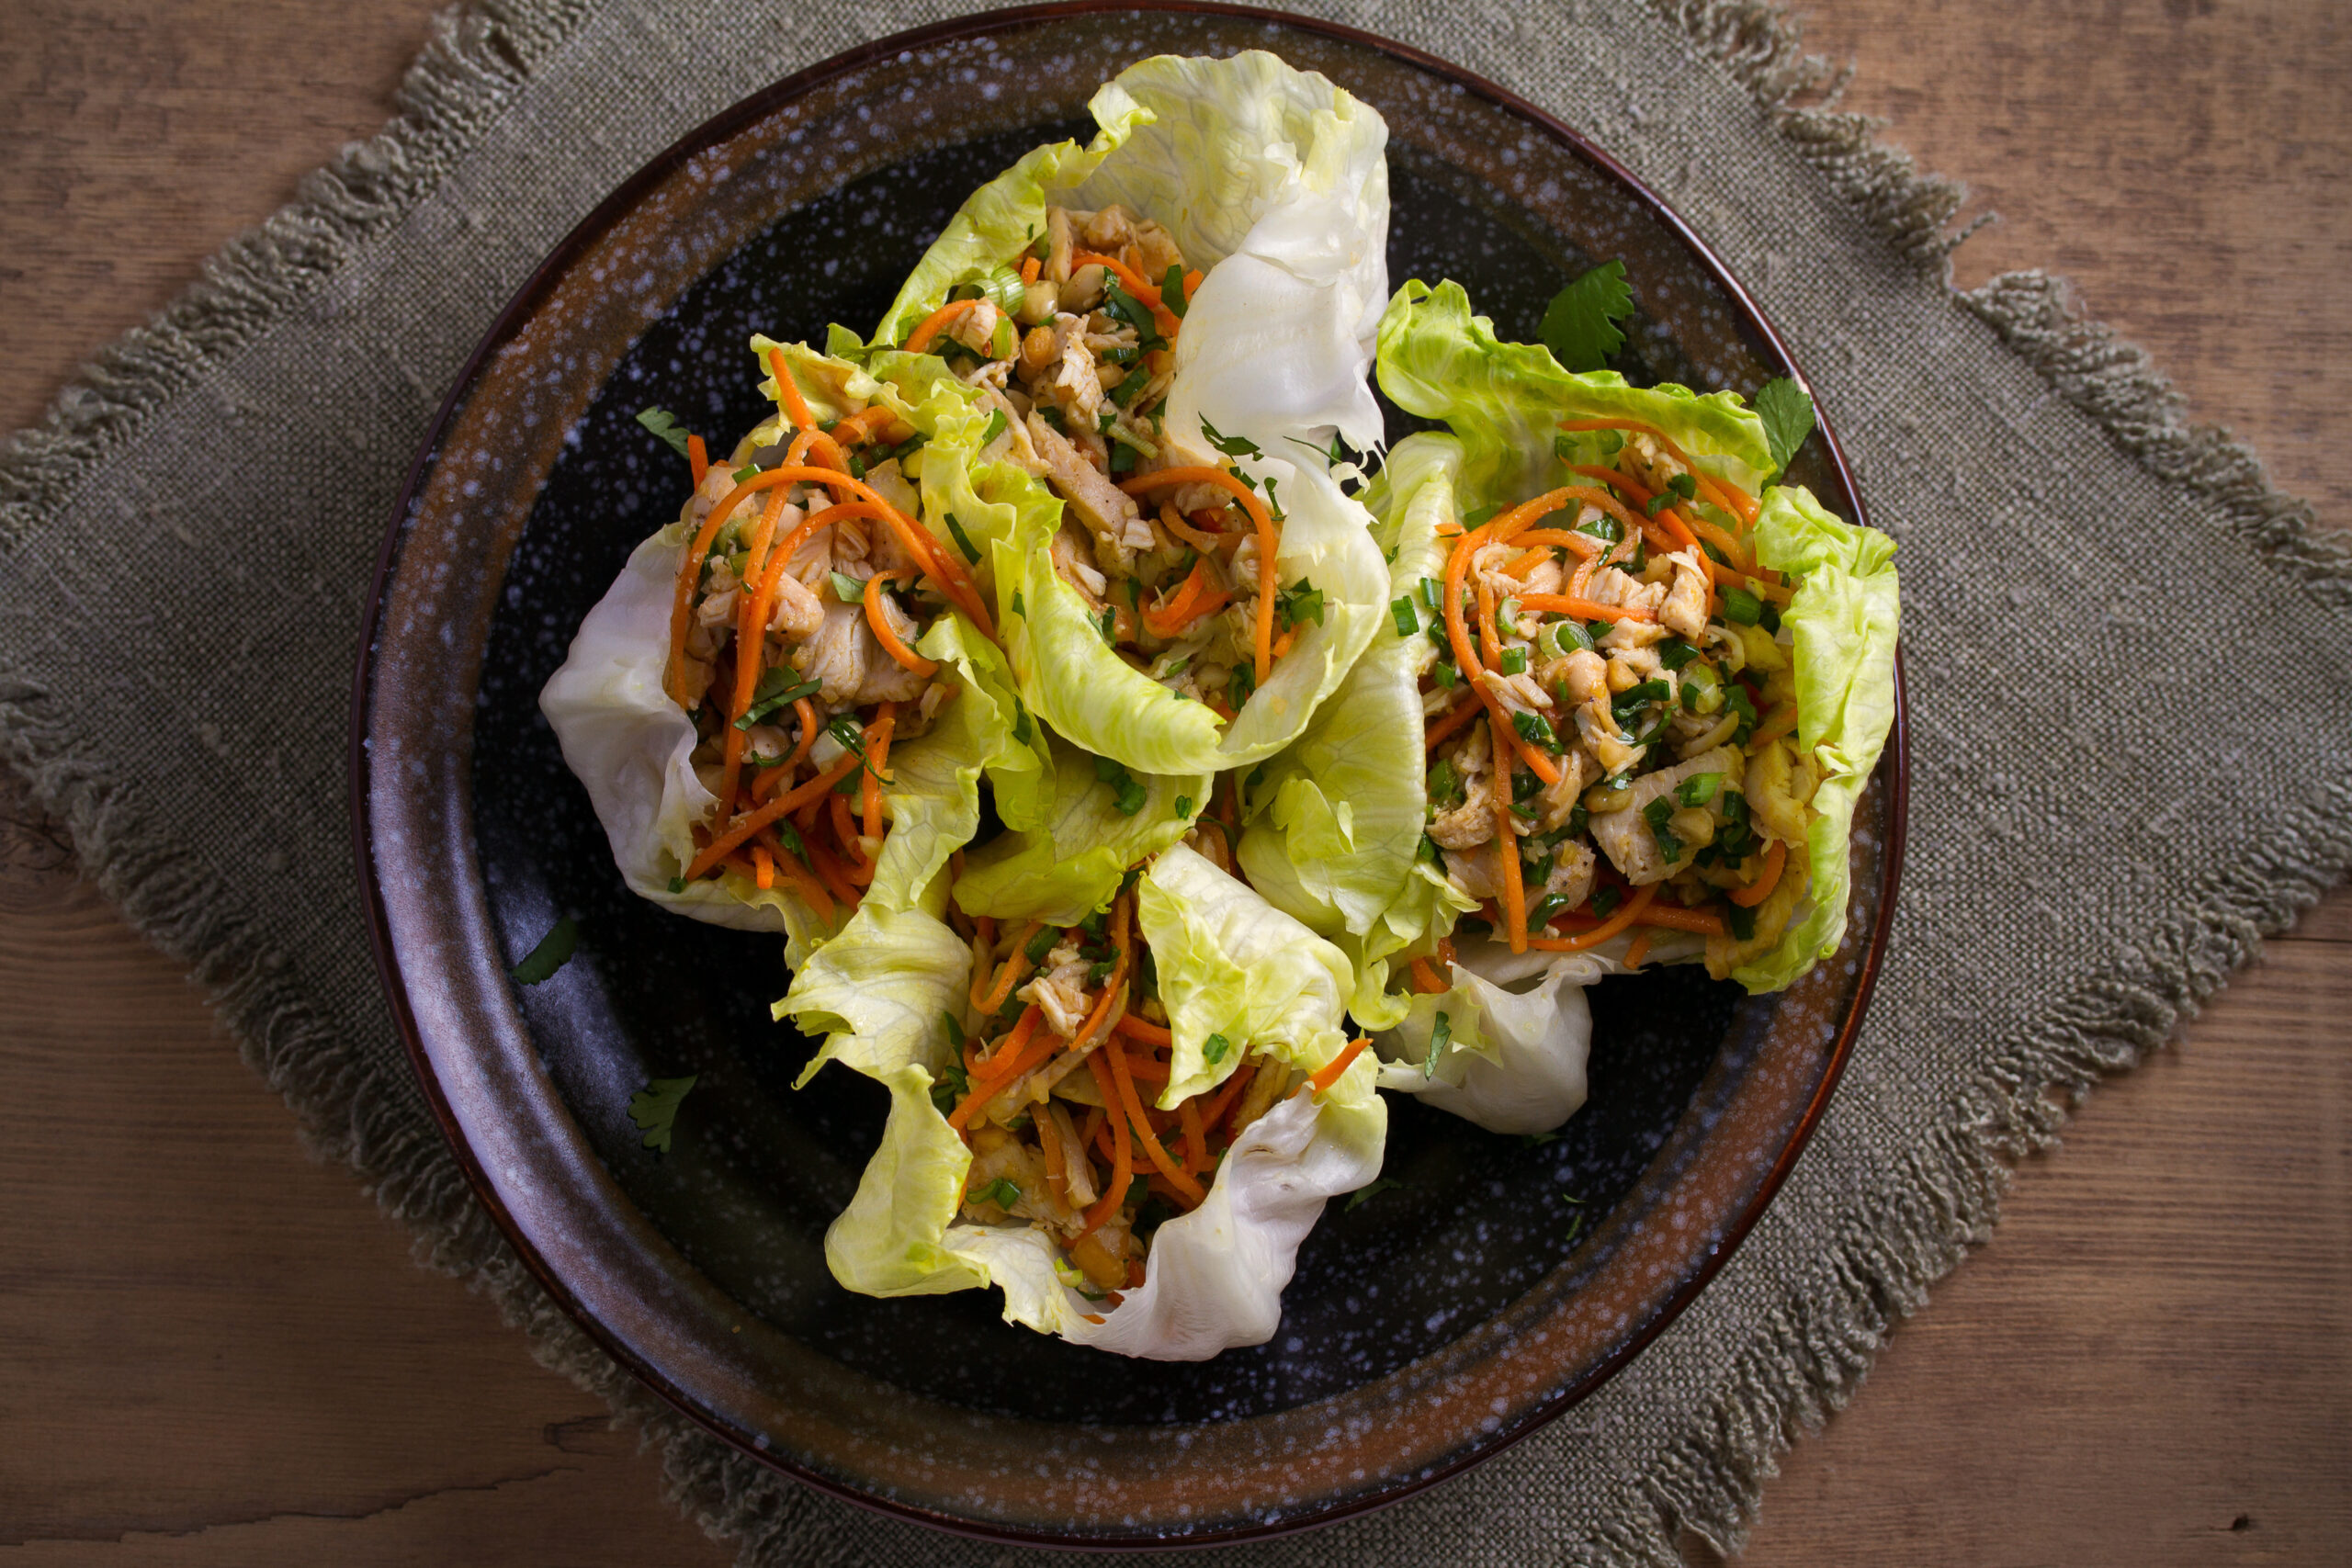 photo shows lettuce wraps with chicken